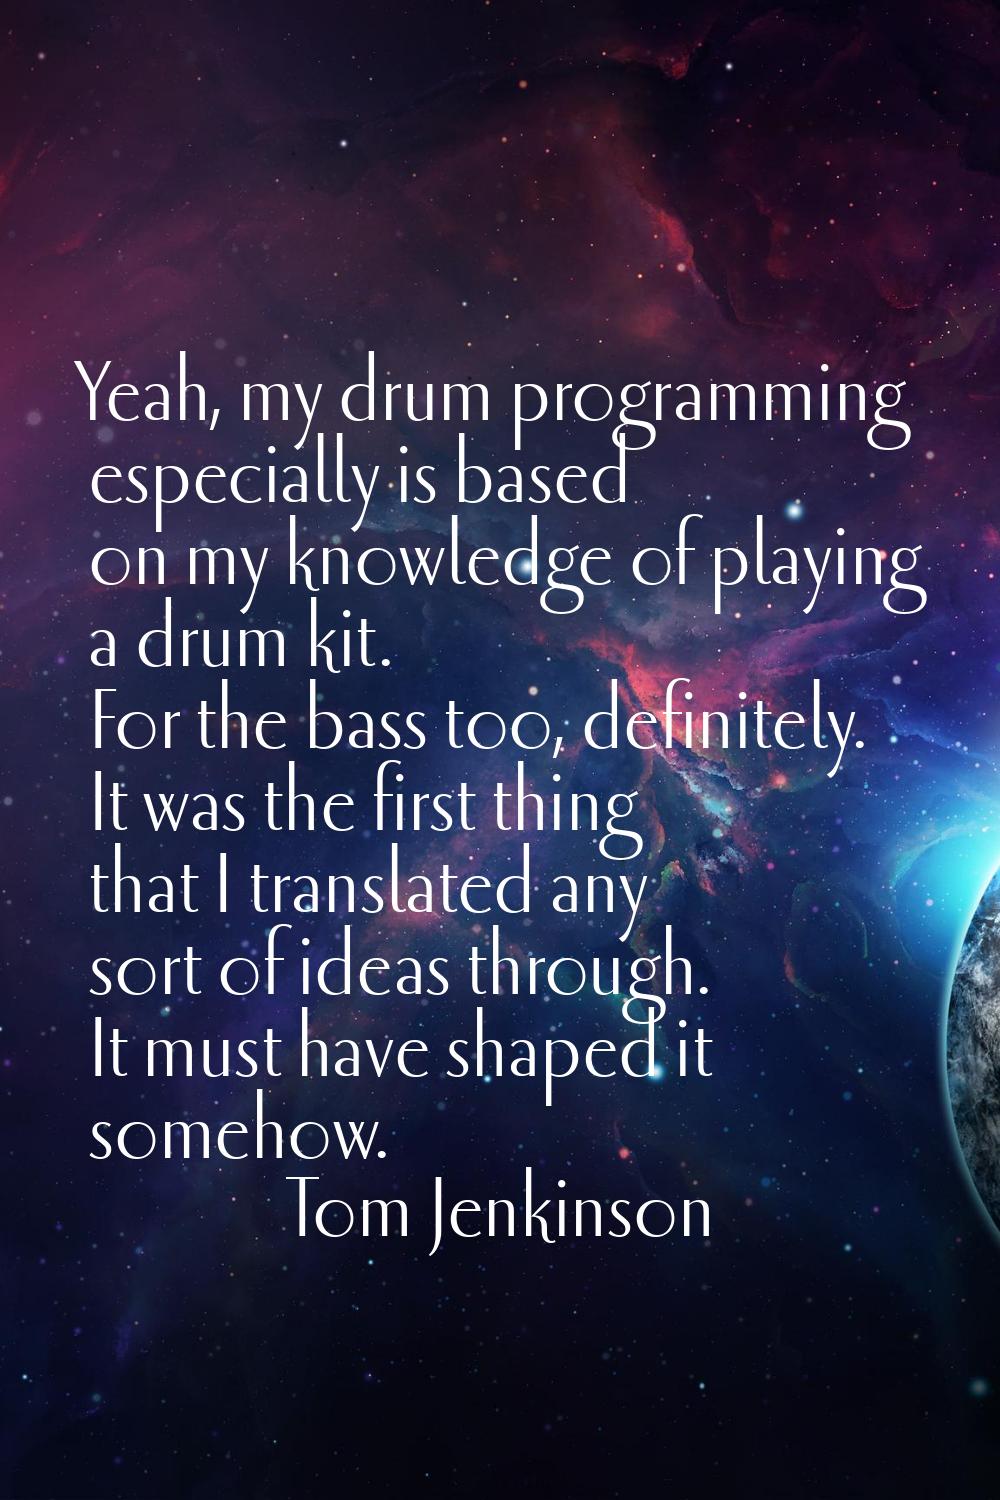 Yeah, my drum programming especially is based on my knowledge of playing a drum kit. For the bass t